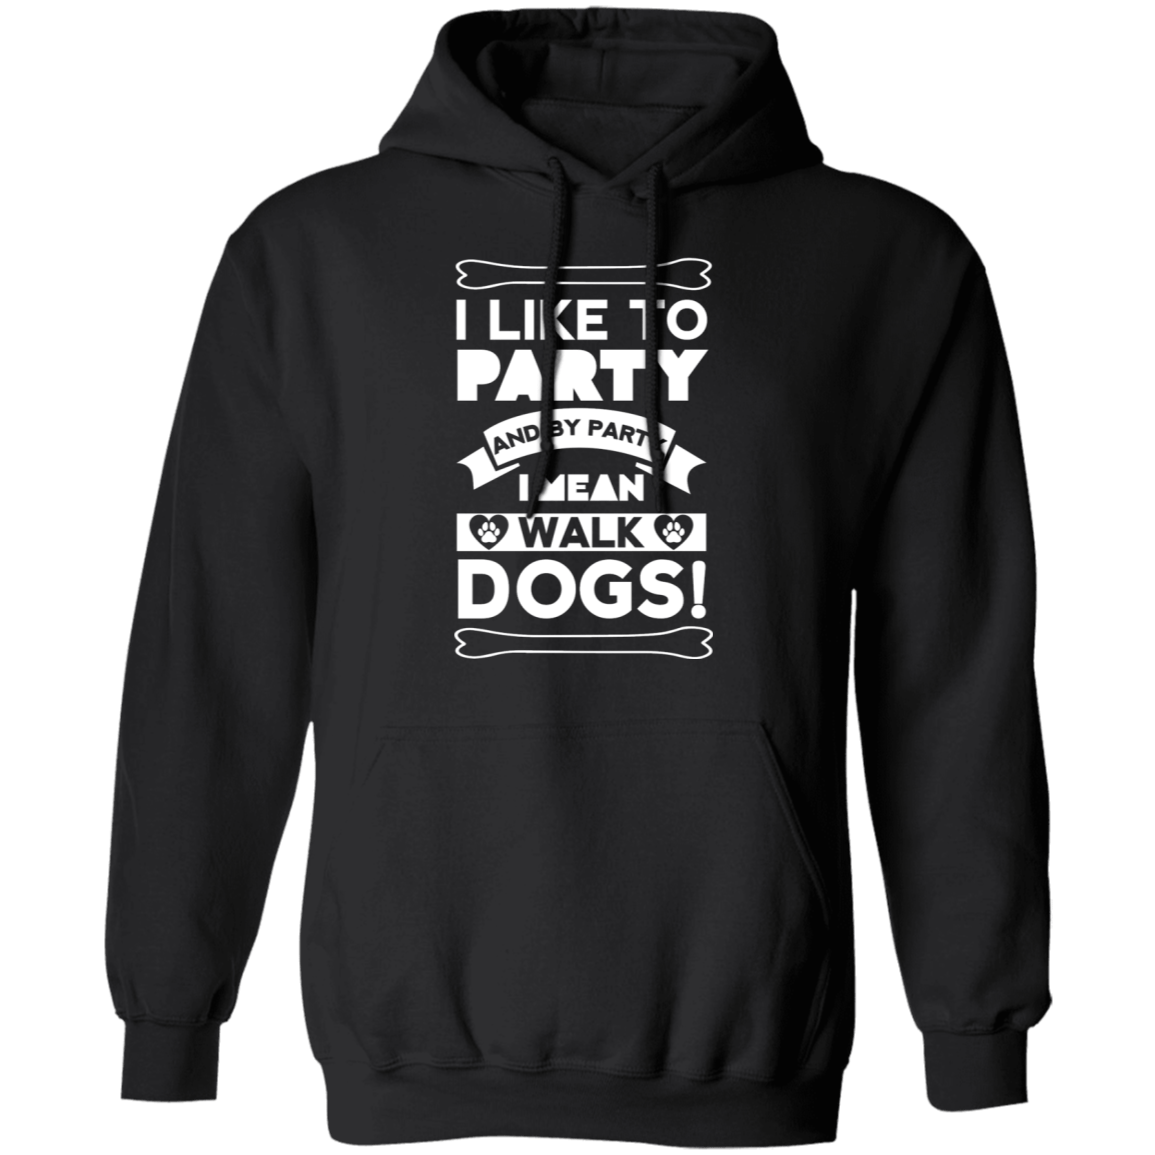 I Like To Party Dogs - Hoodie.